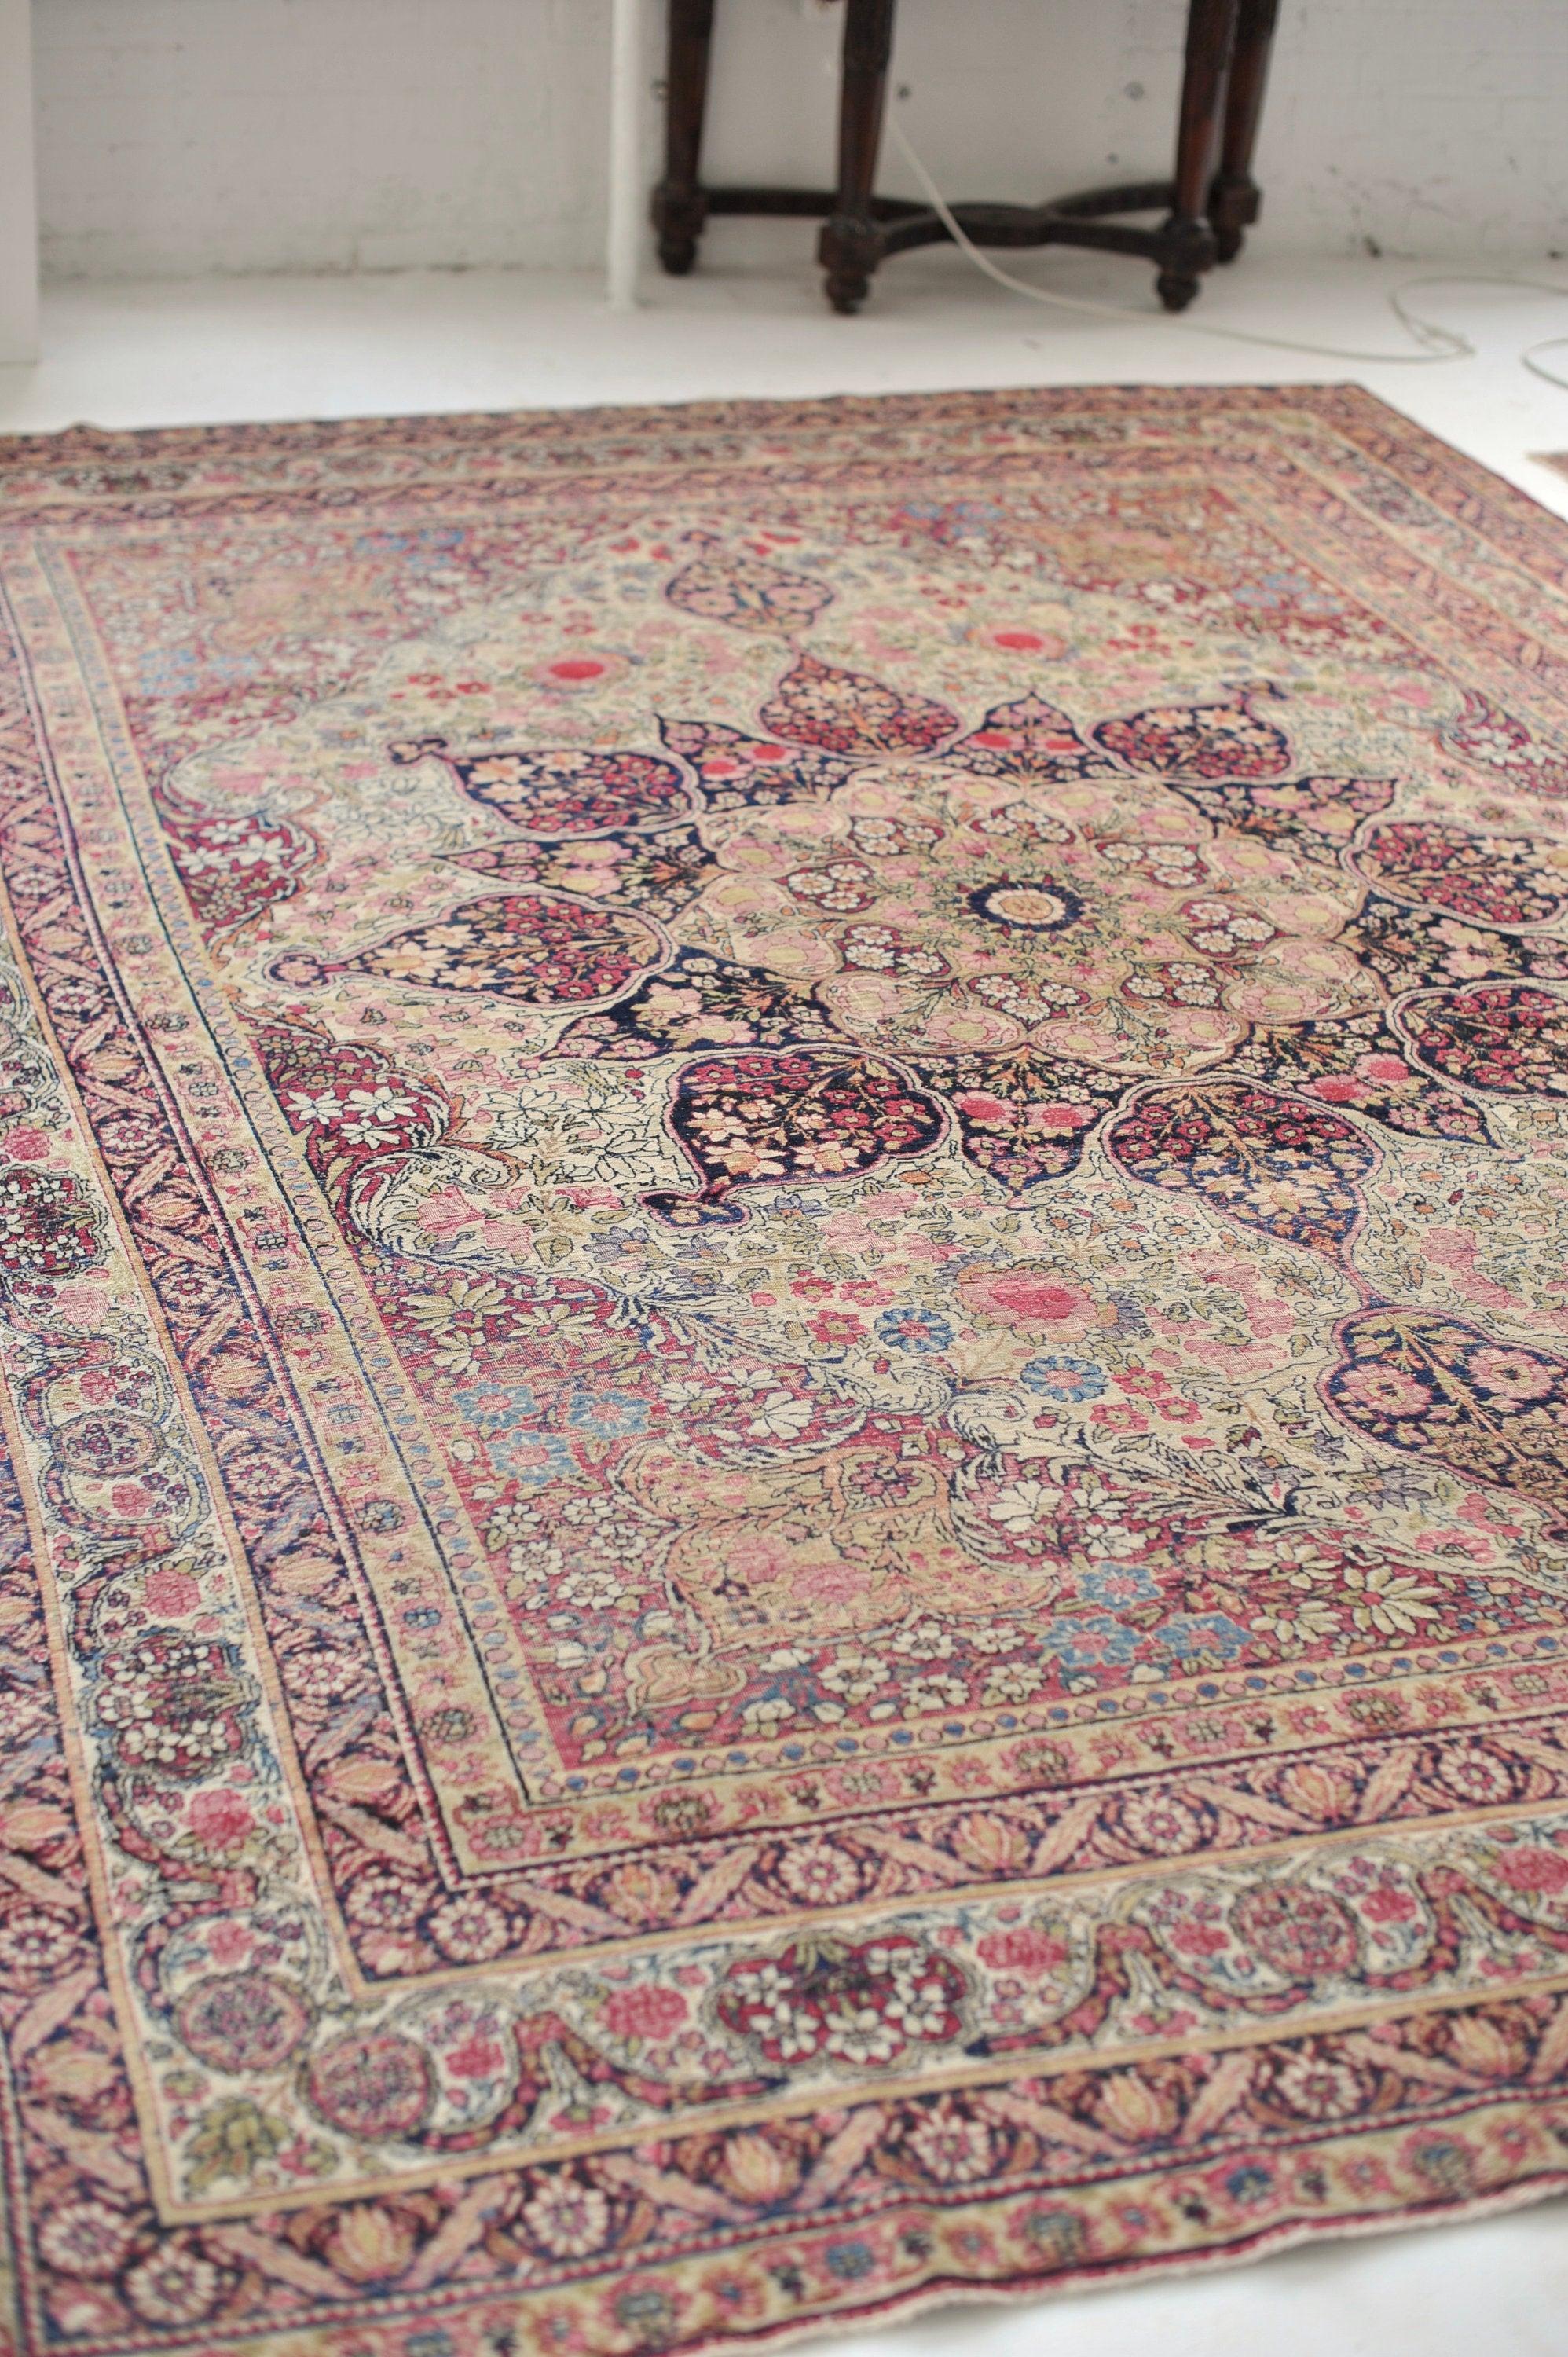 Bella unbelievable Botanical & Architectural Gem antique rug

About: Well... what is there to say about this rug that eyes can't see. It is beyond beautiful, beyond jaw-dropping, and more than grand - it is all-encompassing. It is vast in it's